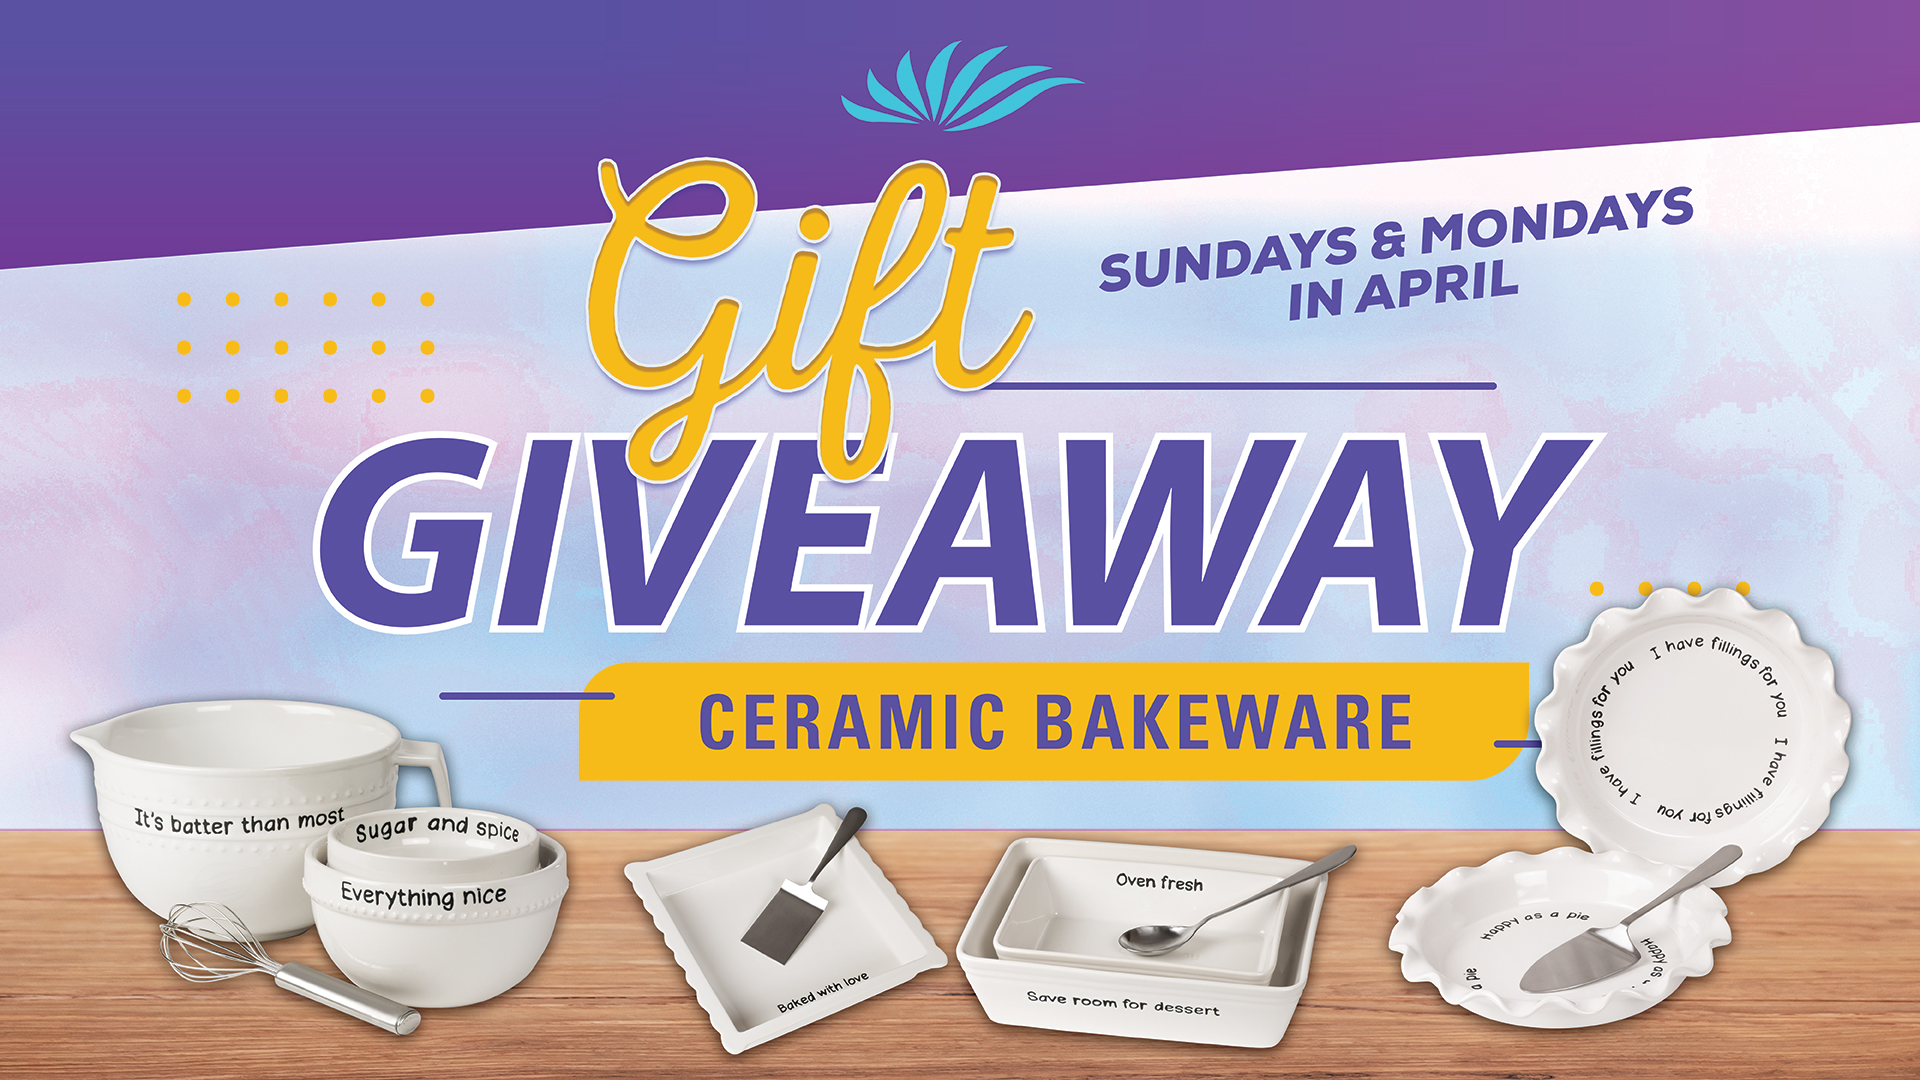 Earn And Get During The Ceramic Bakeware Gift Giveaway At Seven Feathers Casino Resort